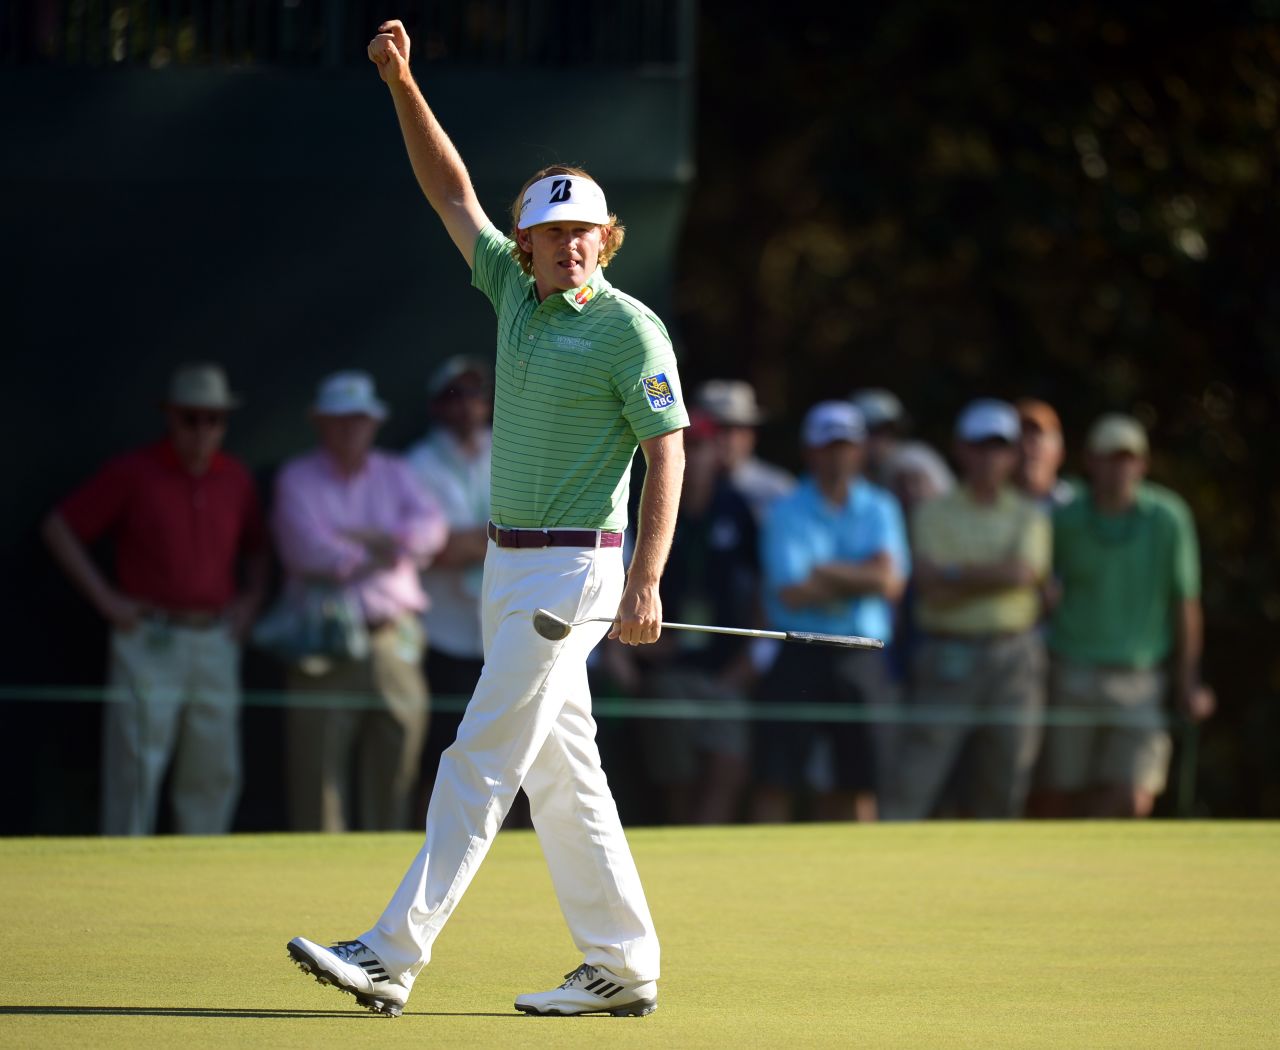 Brandt Snedeker of the United States waves during the third round of the 77th Masters golf tournament at Augusta National Golf Club on Saturday, April 13, in Augusta, Georgia. Click through to see all the shots from the third day and <a href="http://www.cnn.com/2013/04/12/golf/gallery/masters-round-two/index.html" target="_blank">look back at the second round</a>.